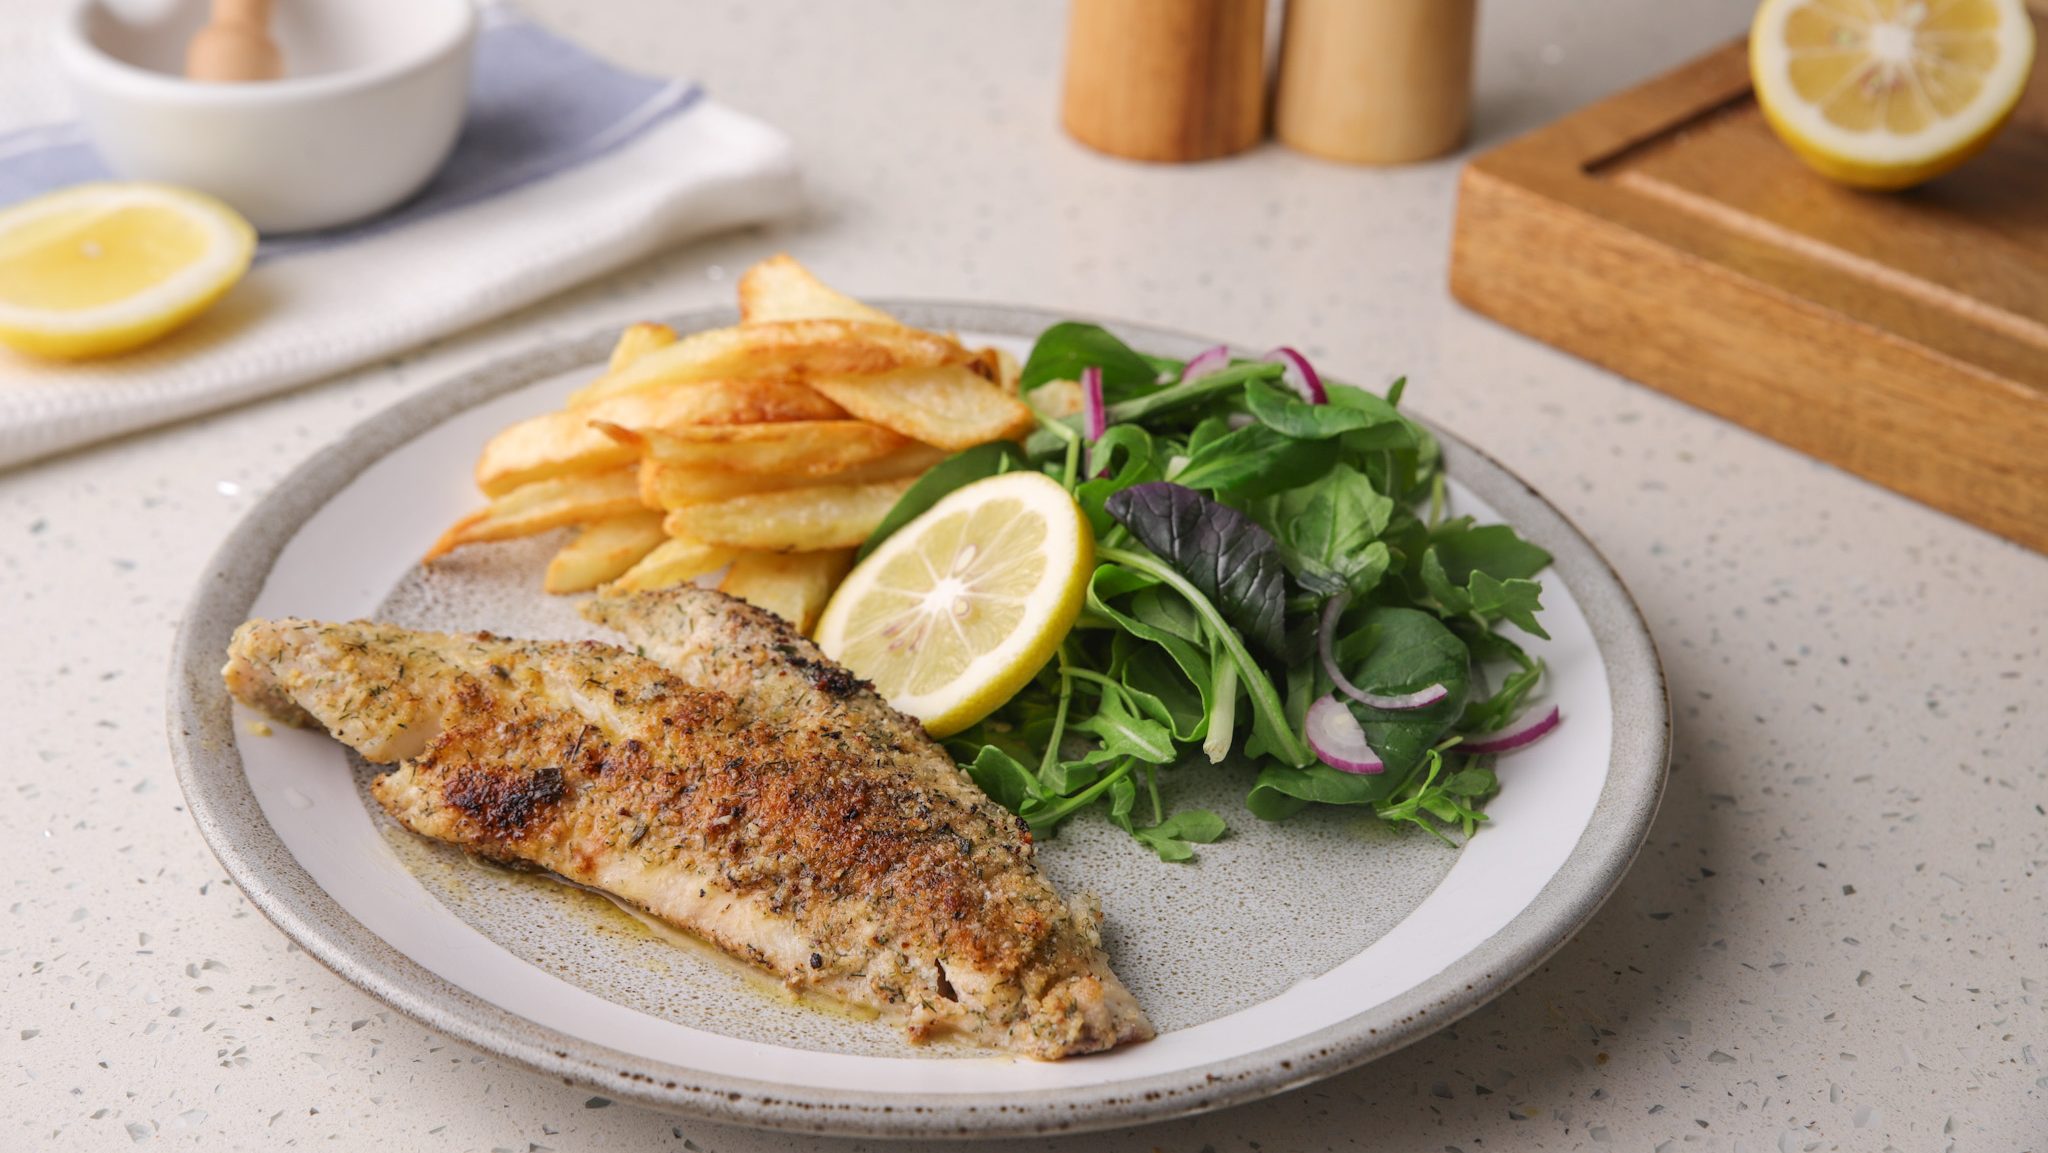 Pan-fried fish fillet with chips, green salad and a lemon slice served on a grey round plate.